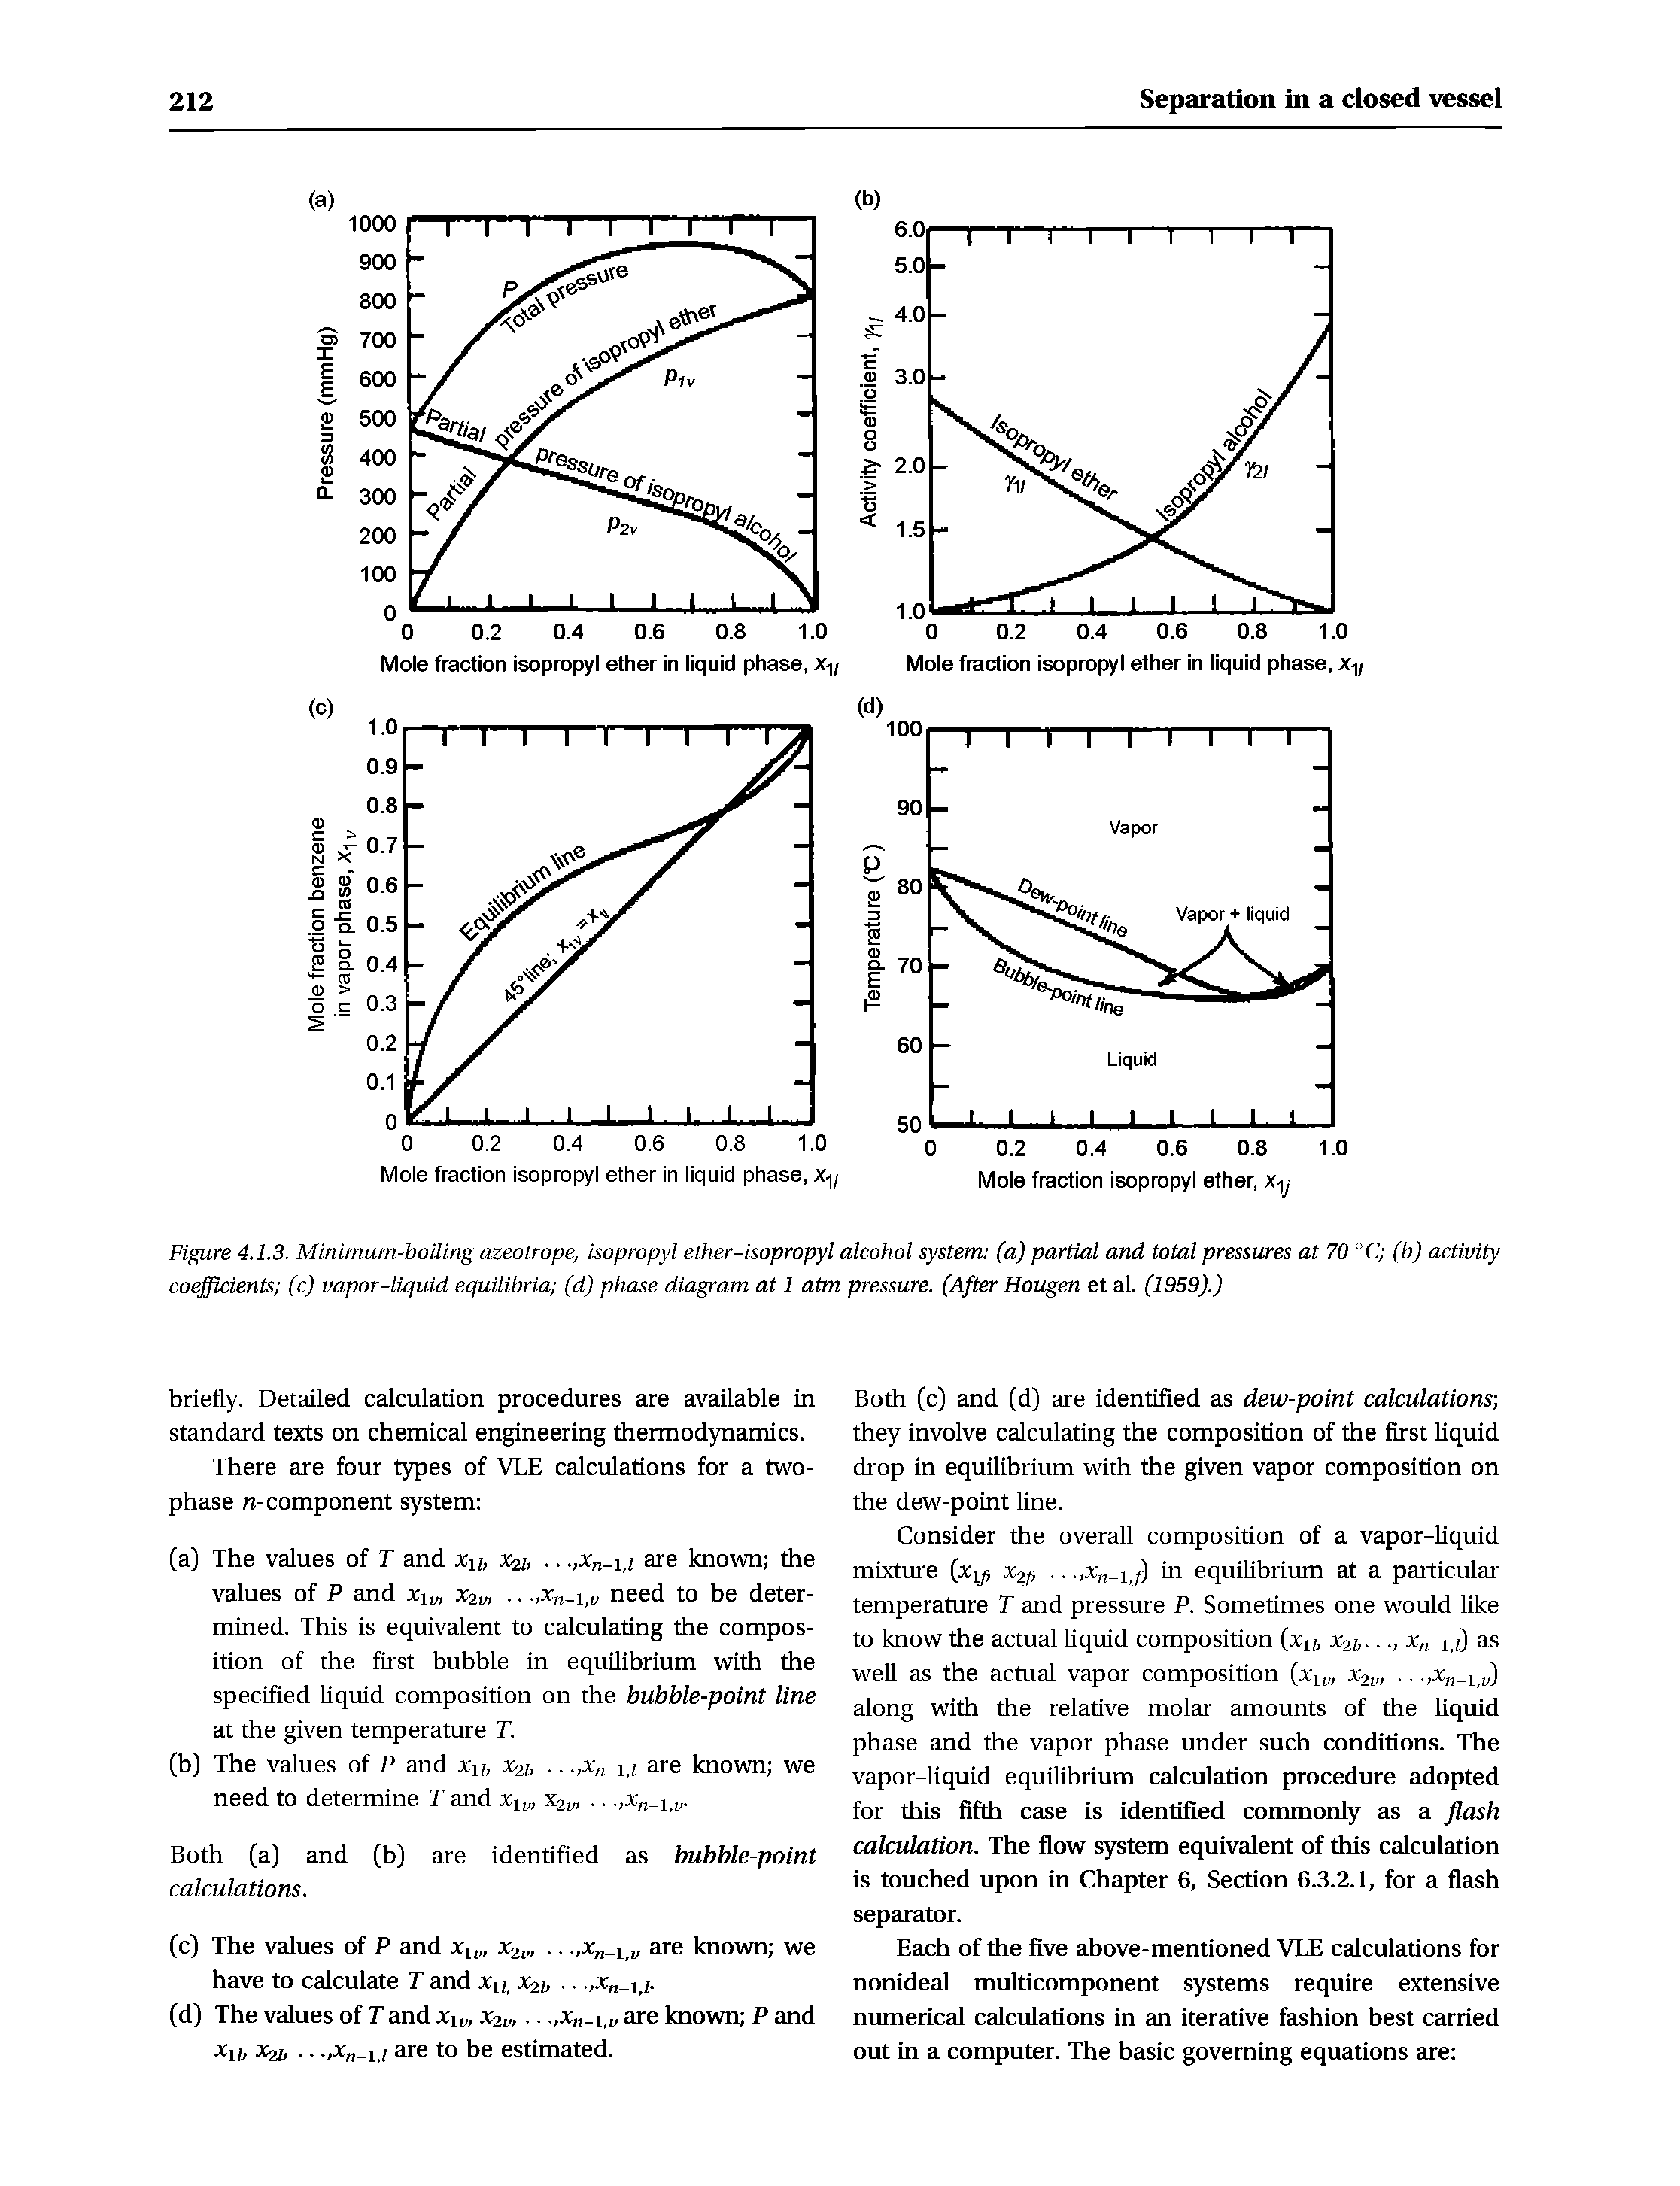 Figure 4.1.3. Minimum-boiling azeotrope, isopropyl ether-isopropyl alcohol system (a) partial and total pressures at 70 °C (b) activity coefficients (c) vapor-liquid equilibria (d) phase diagram at 1 atm pressure. (After Hougen et al. (1959).)...